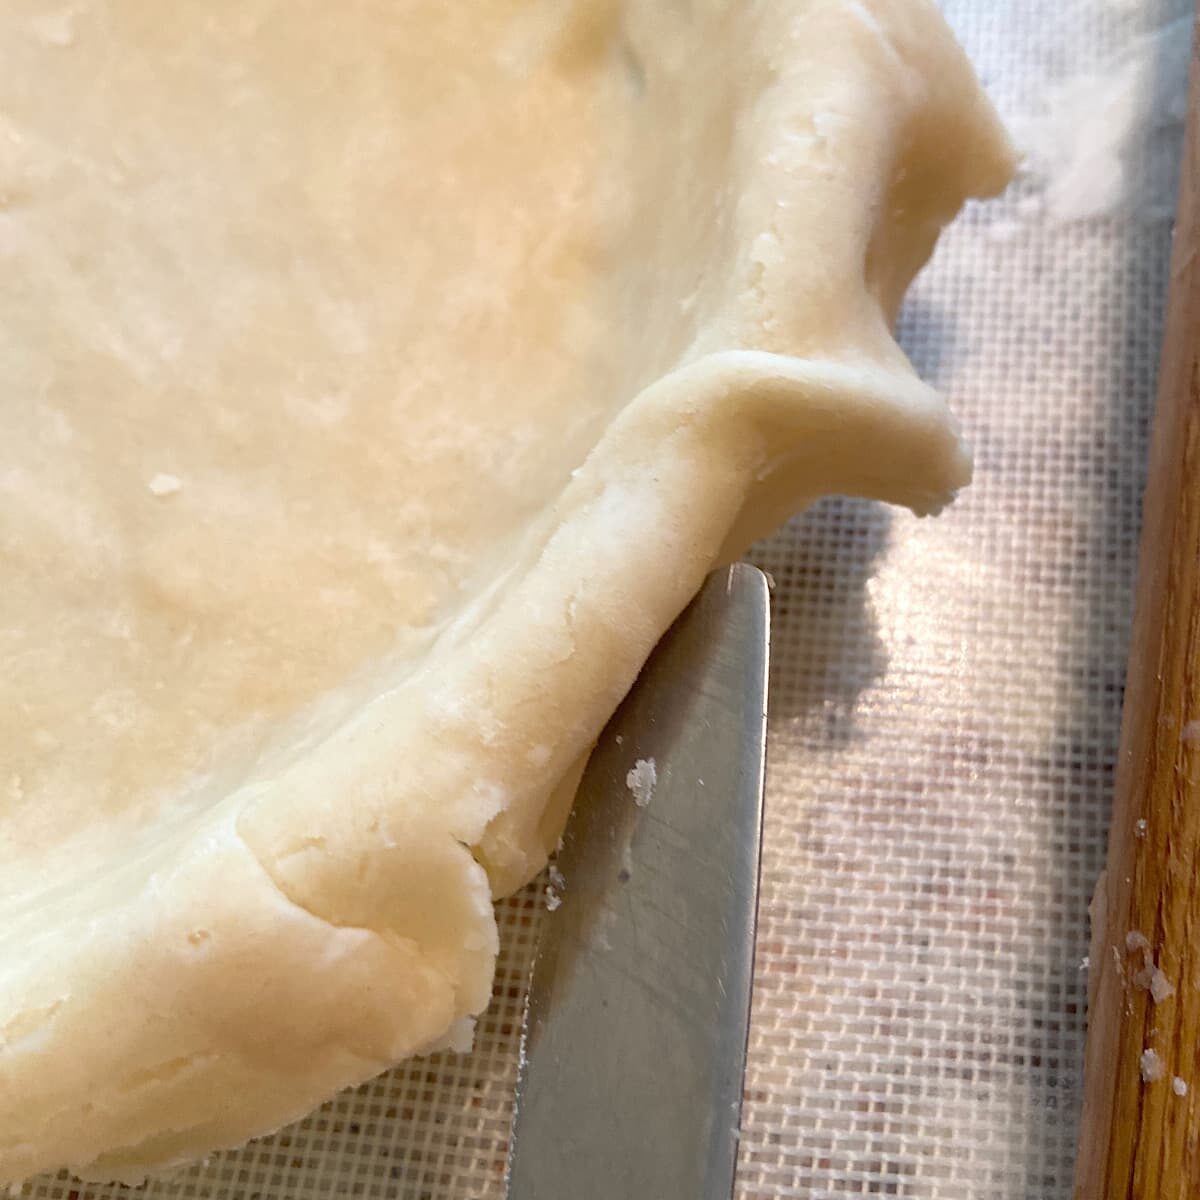 cutting away excess dough from edge